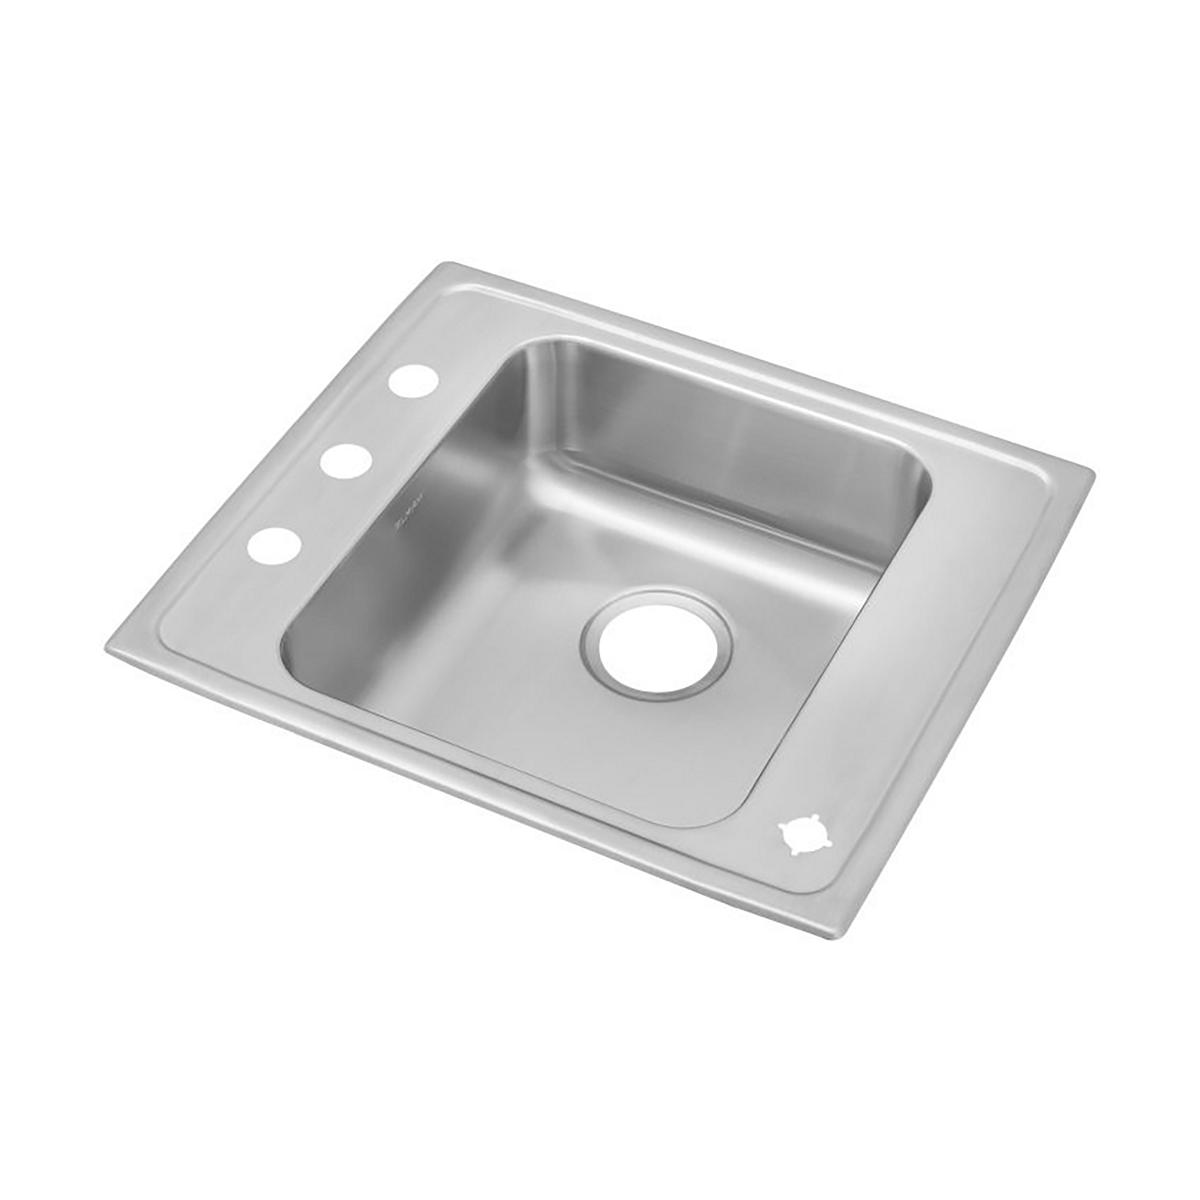 Elkay Lustertone Classic 22" x 19-1/2" x 4" Single Bowl Drop-in Classroom ADA Sink with Quick-clip and Rear and Right Deck